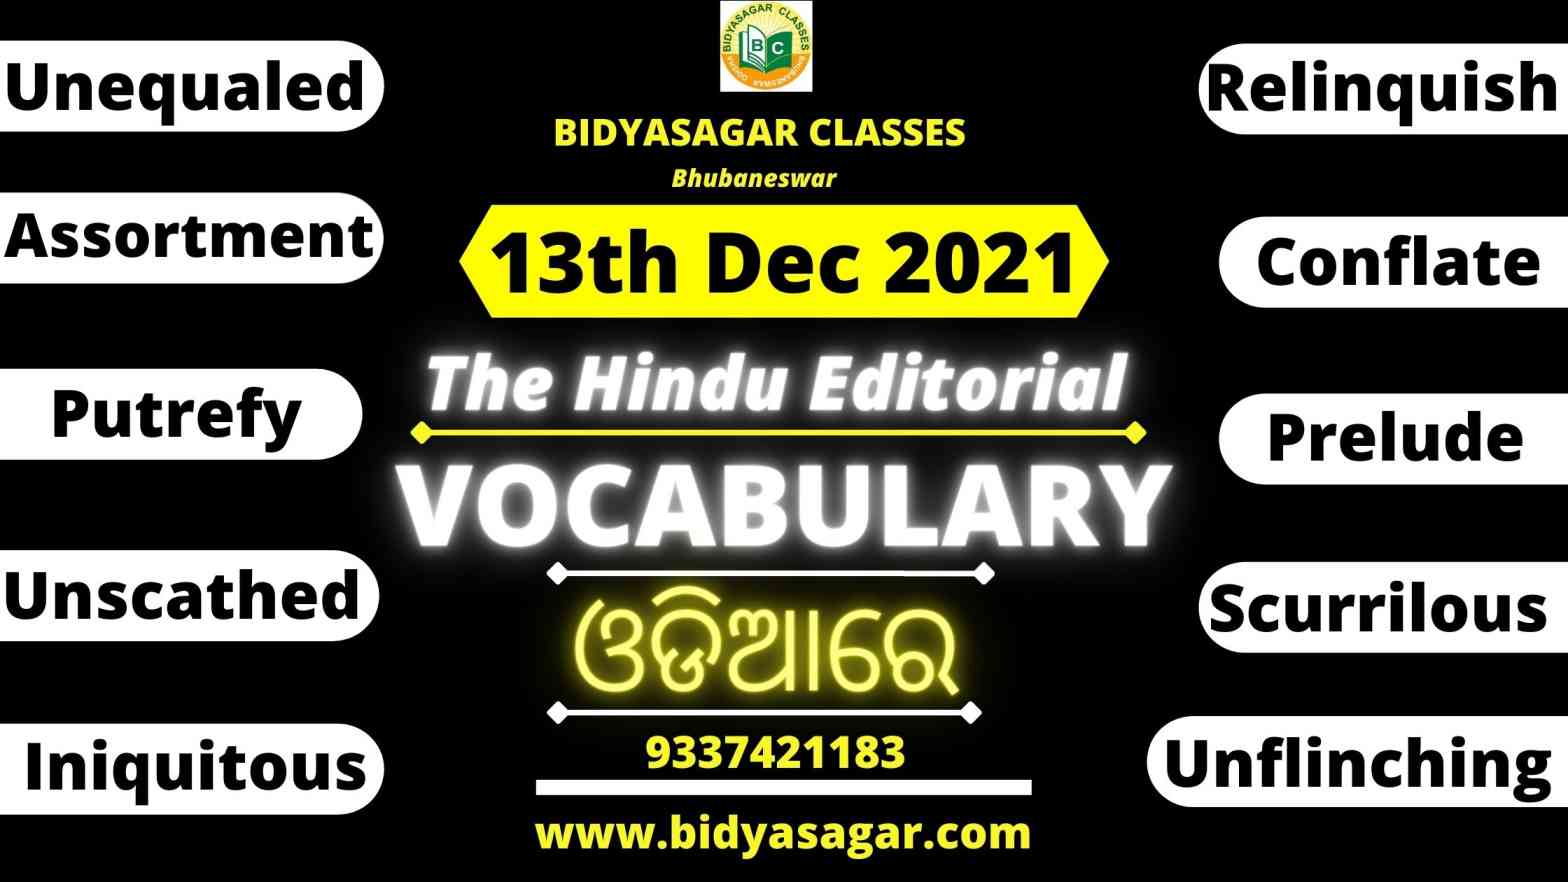 The Hindu Editorial Vocabulary of 13th December 2021